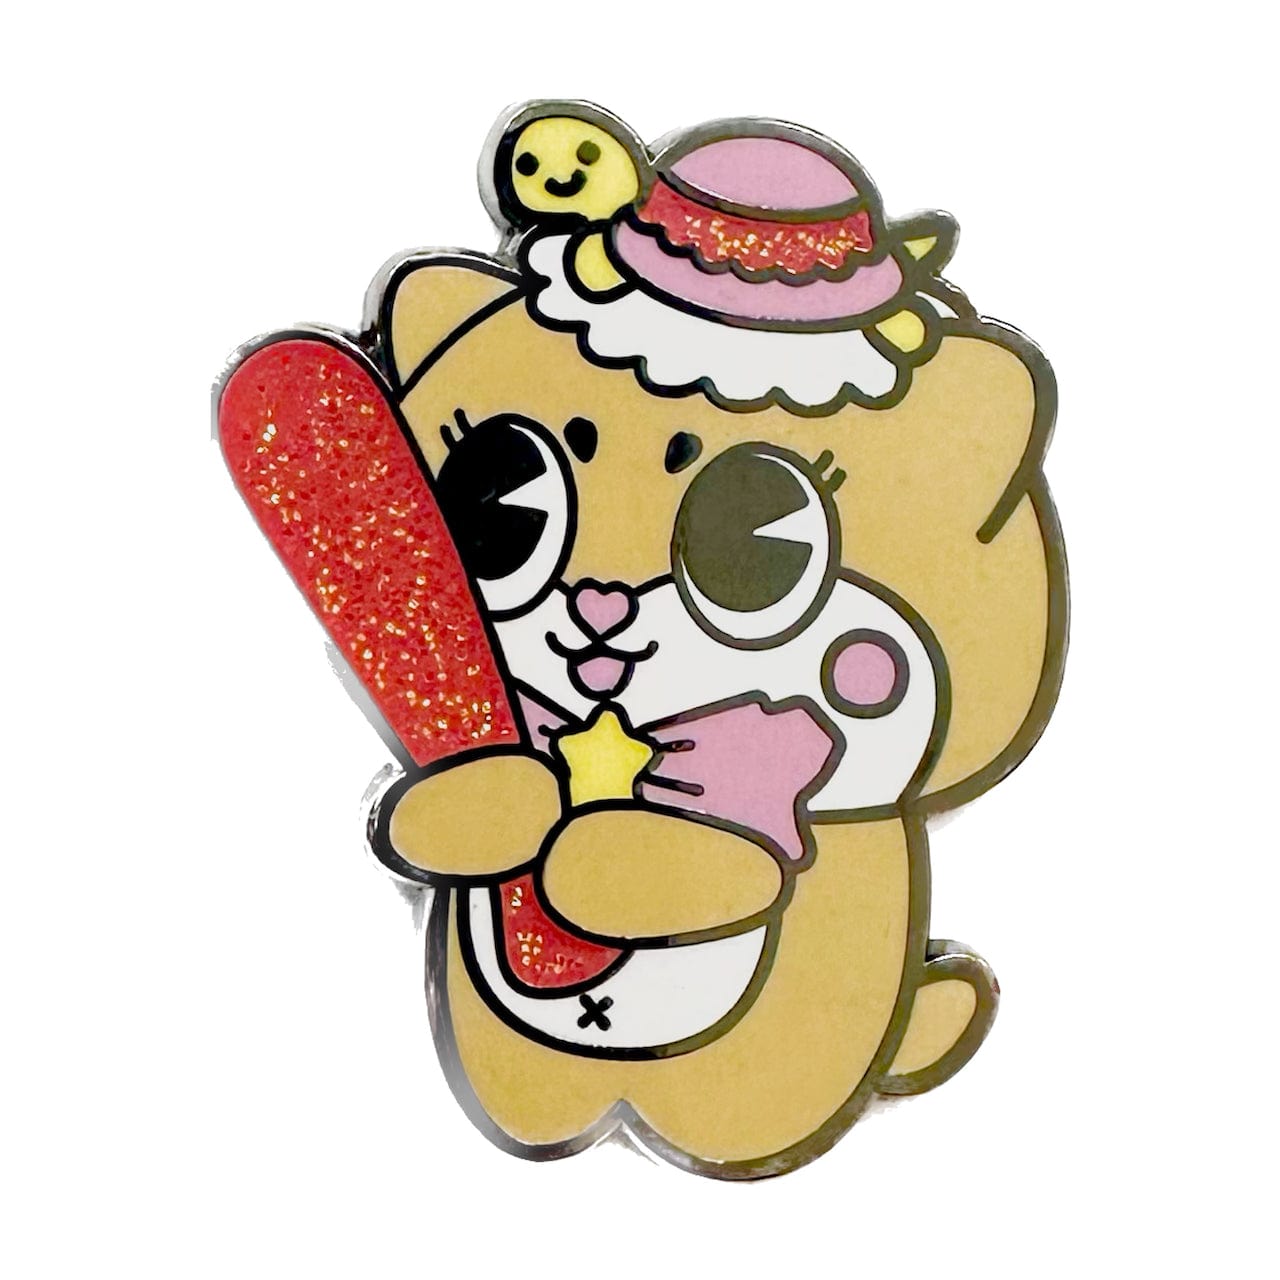 Pinbuds Enamel pin Chaotic destructive otter pin - Chiitan from Kochi prefecture (Japan Mascot collection)